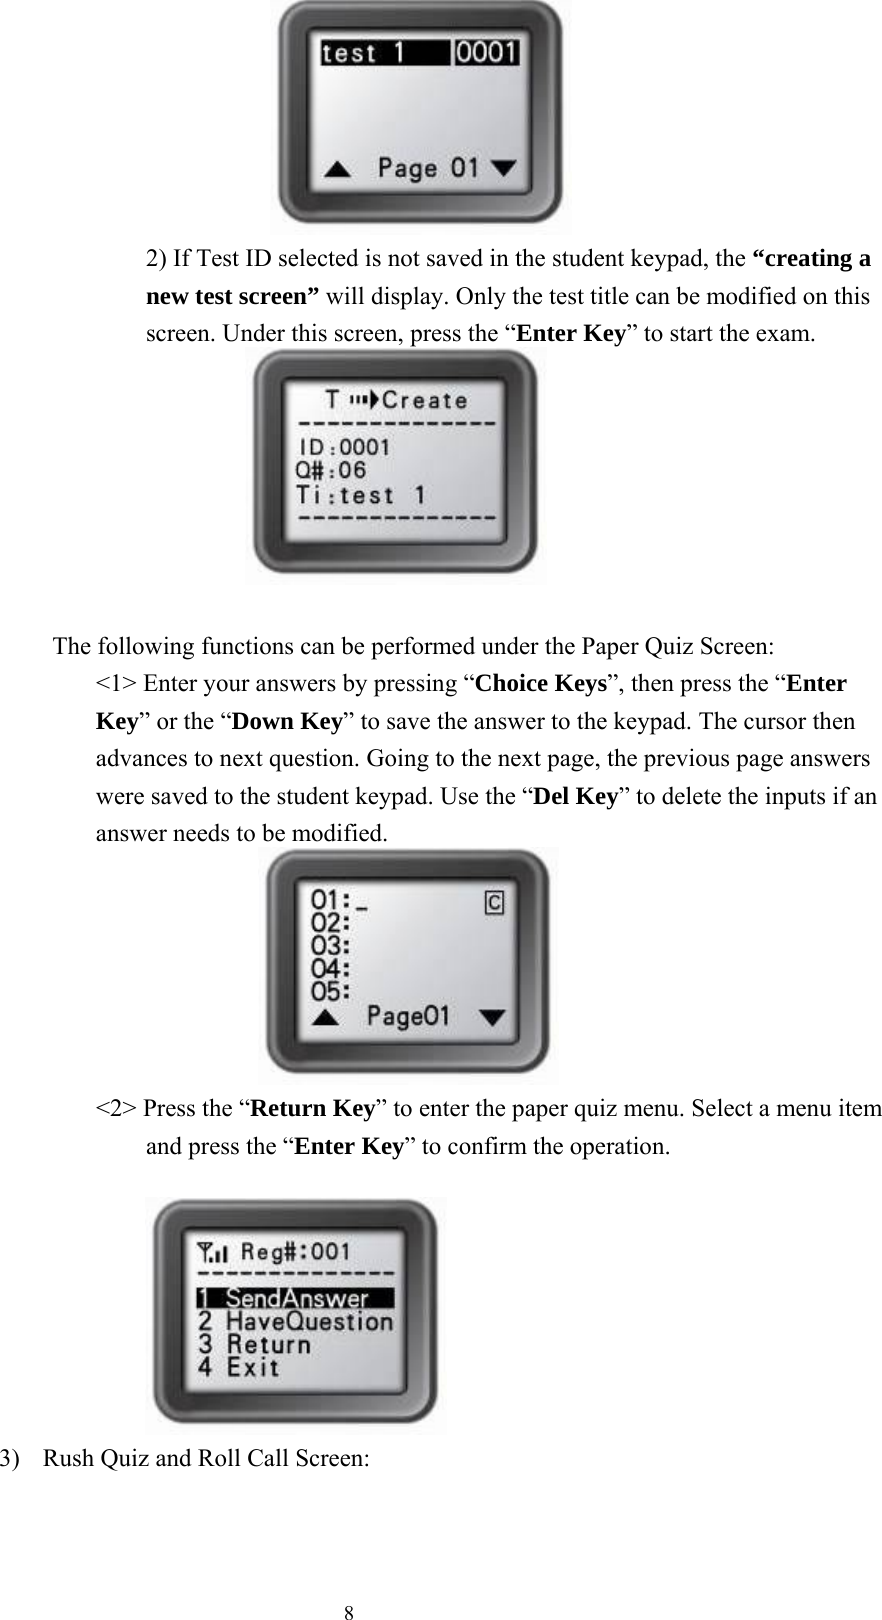  8                     2) If Test ID selected is not saved in the student keypad, the “creating a new test screen” will display. Only the test title can be modified on this screen. Under this screen, press the “Enter Key” to start the exam.               The following functions can be performed under the Paper Quiz Screen: &lt;1&gt; Enter your answers by pressing “Choice Keys”, then press the “Enter Key” or the “Down Key” to save the answer to the keypad. The cursor then advances to next question. Going to the next page, the previous page answers were saved to the student keypad. Use the “Del Key” to delete the inputs if an answer needs to be modified.                         &lt;2&gt; Press the “Return Key” to enter the paper quiz menu. Select a menu item and press the “Enter Key” to confirm the operation.                                                                   3)  Rush Quiz and Roll Call Screen: 